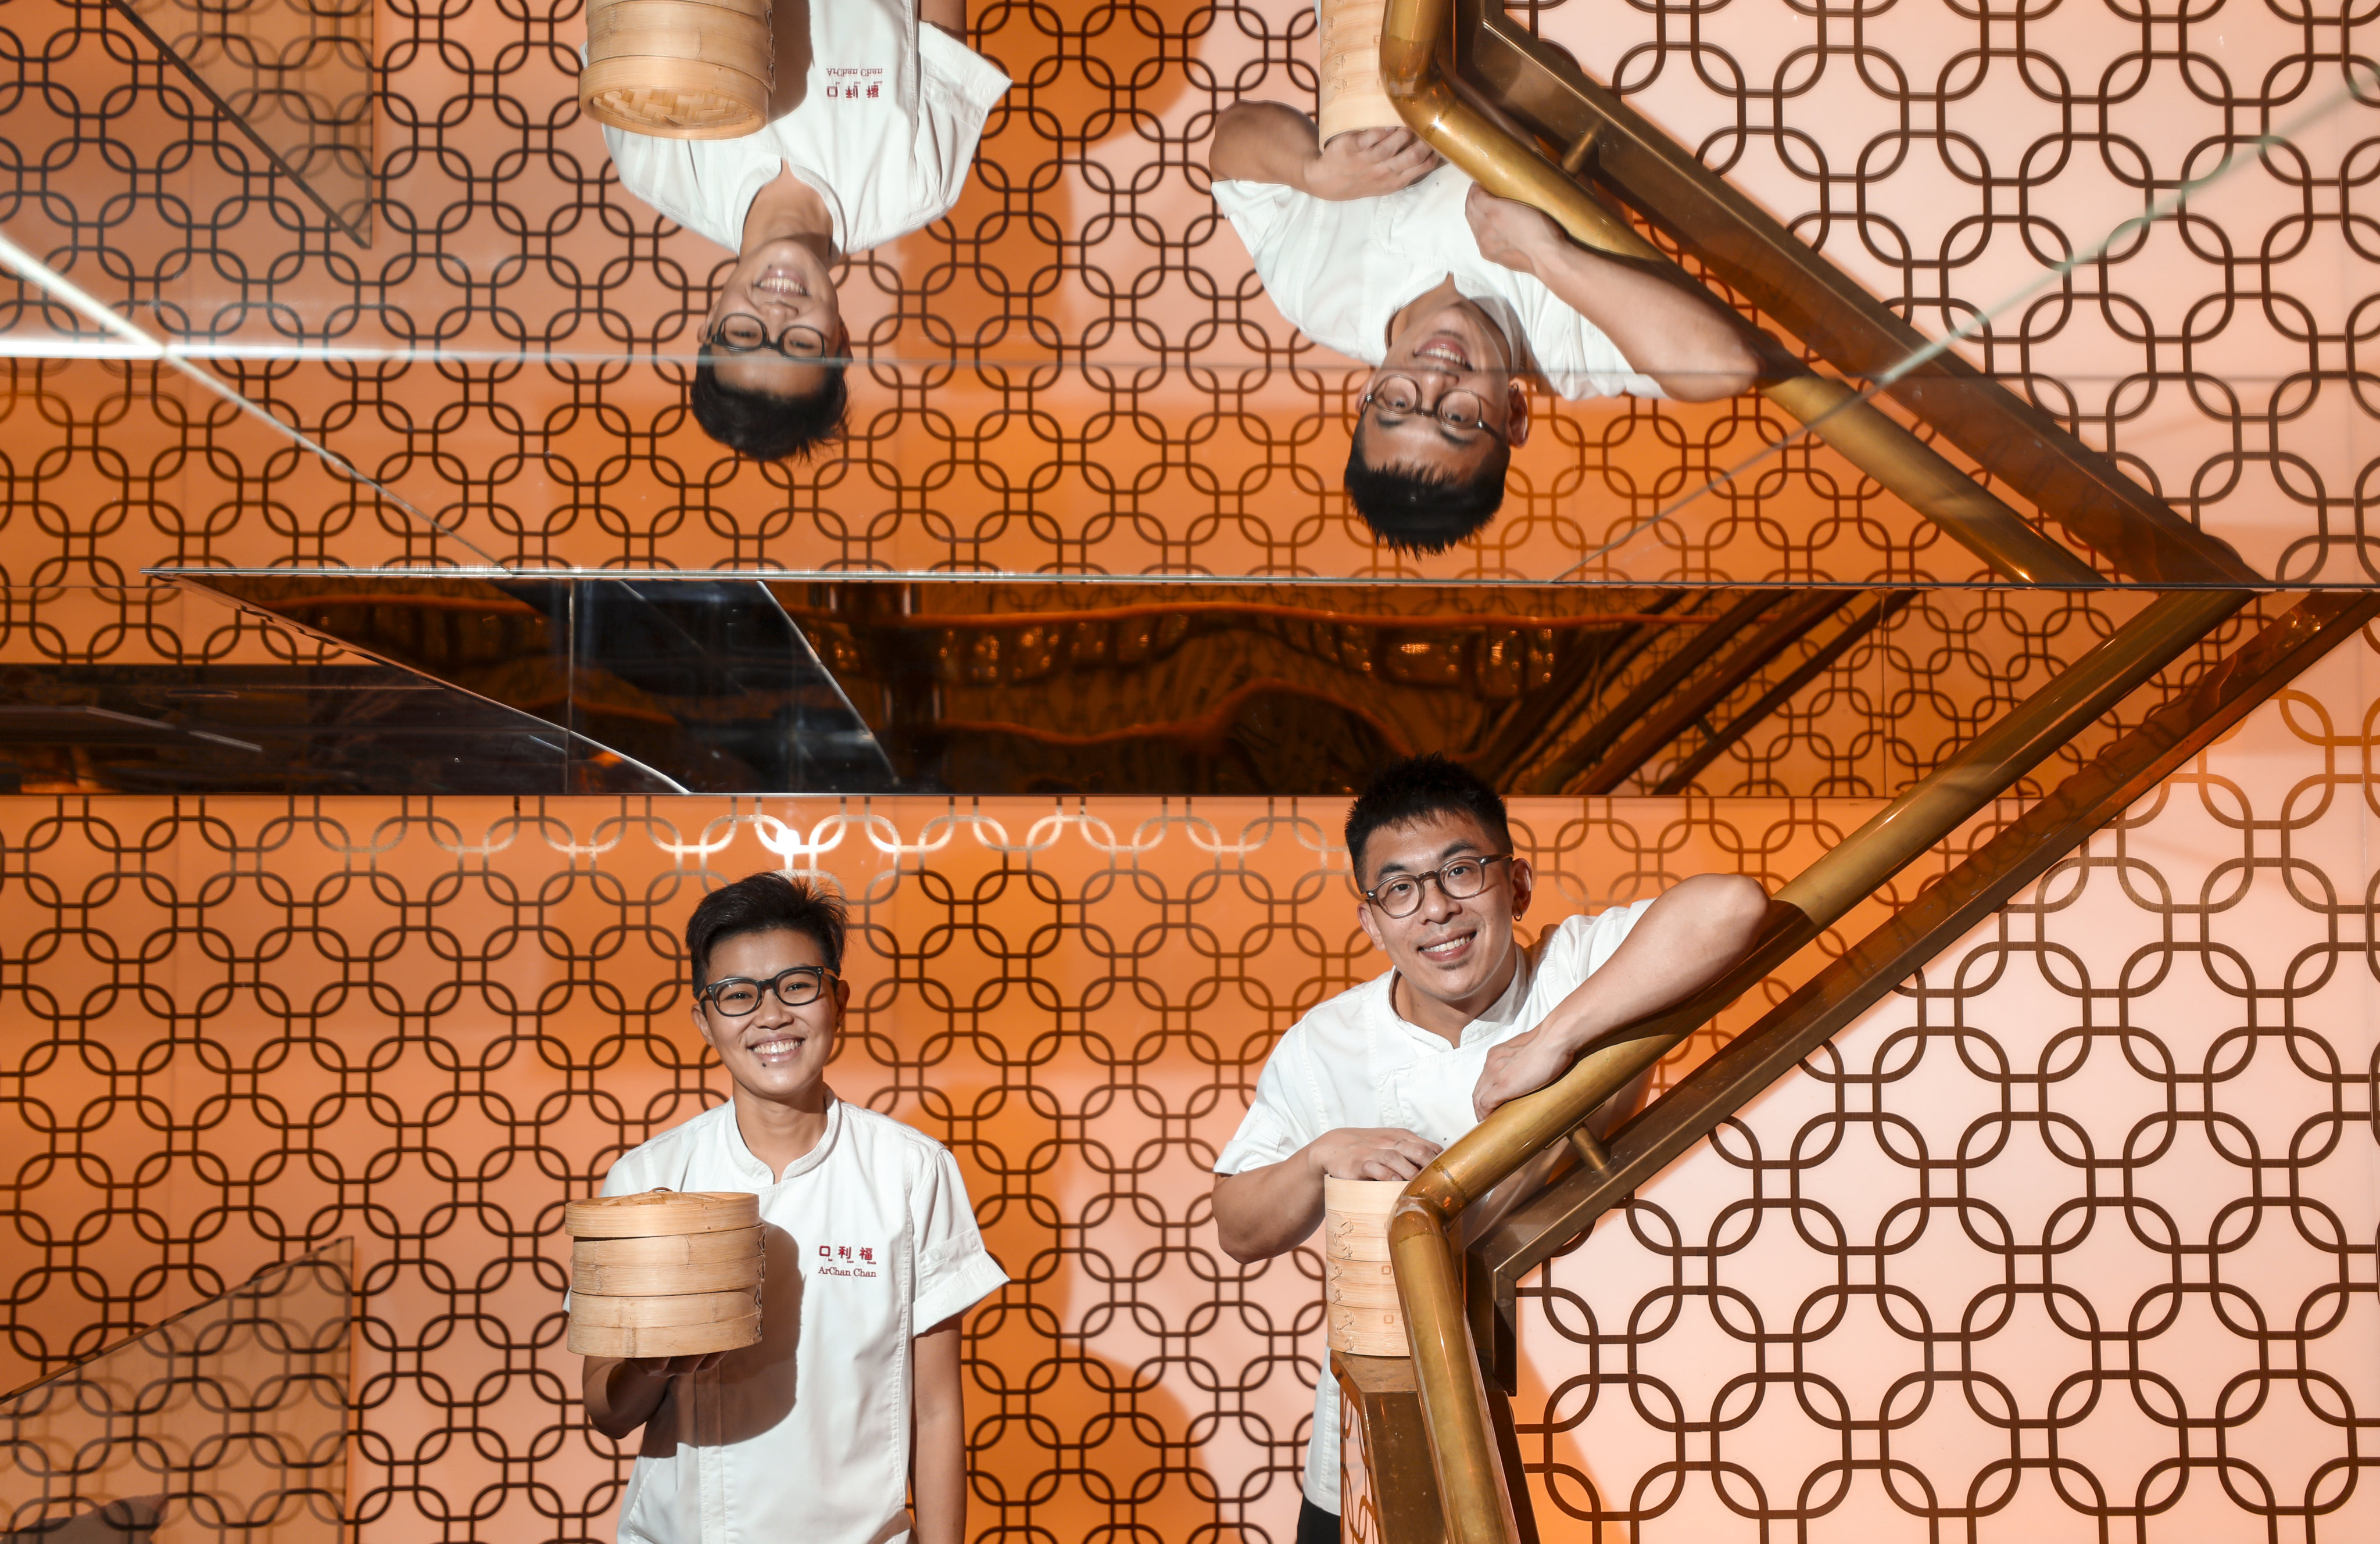 Ho Lee Fook executive chef Archan Chan Kit-ying (left) and dim sum chef Winson Yip Chun-man, two of the Hong Kong chefs helping define the city’s culinary identity through their innovative approach to traditional cooking. Photo: Xiaomei Chen